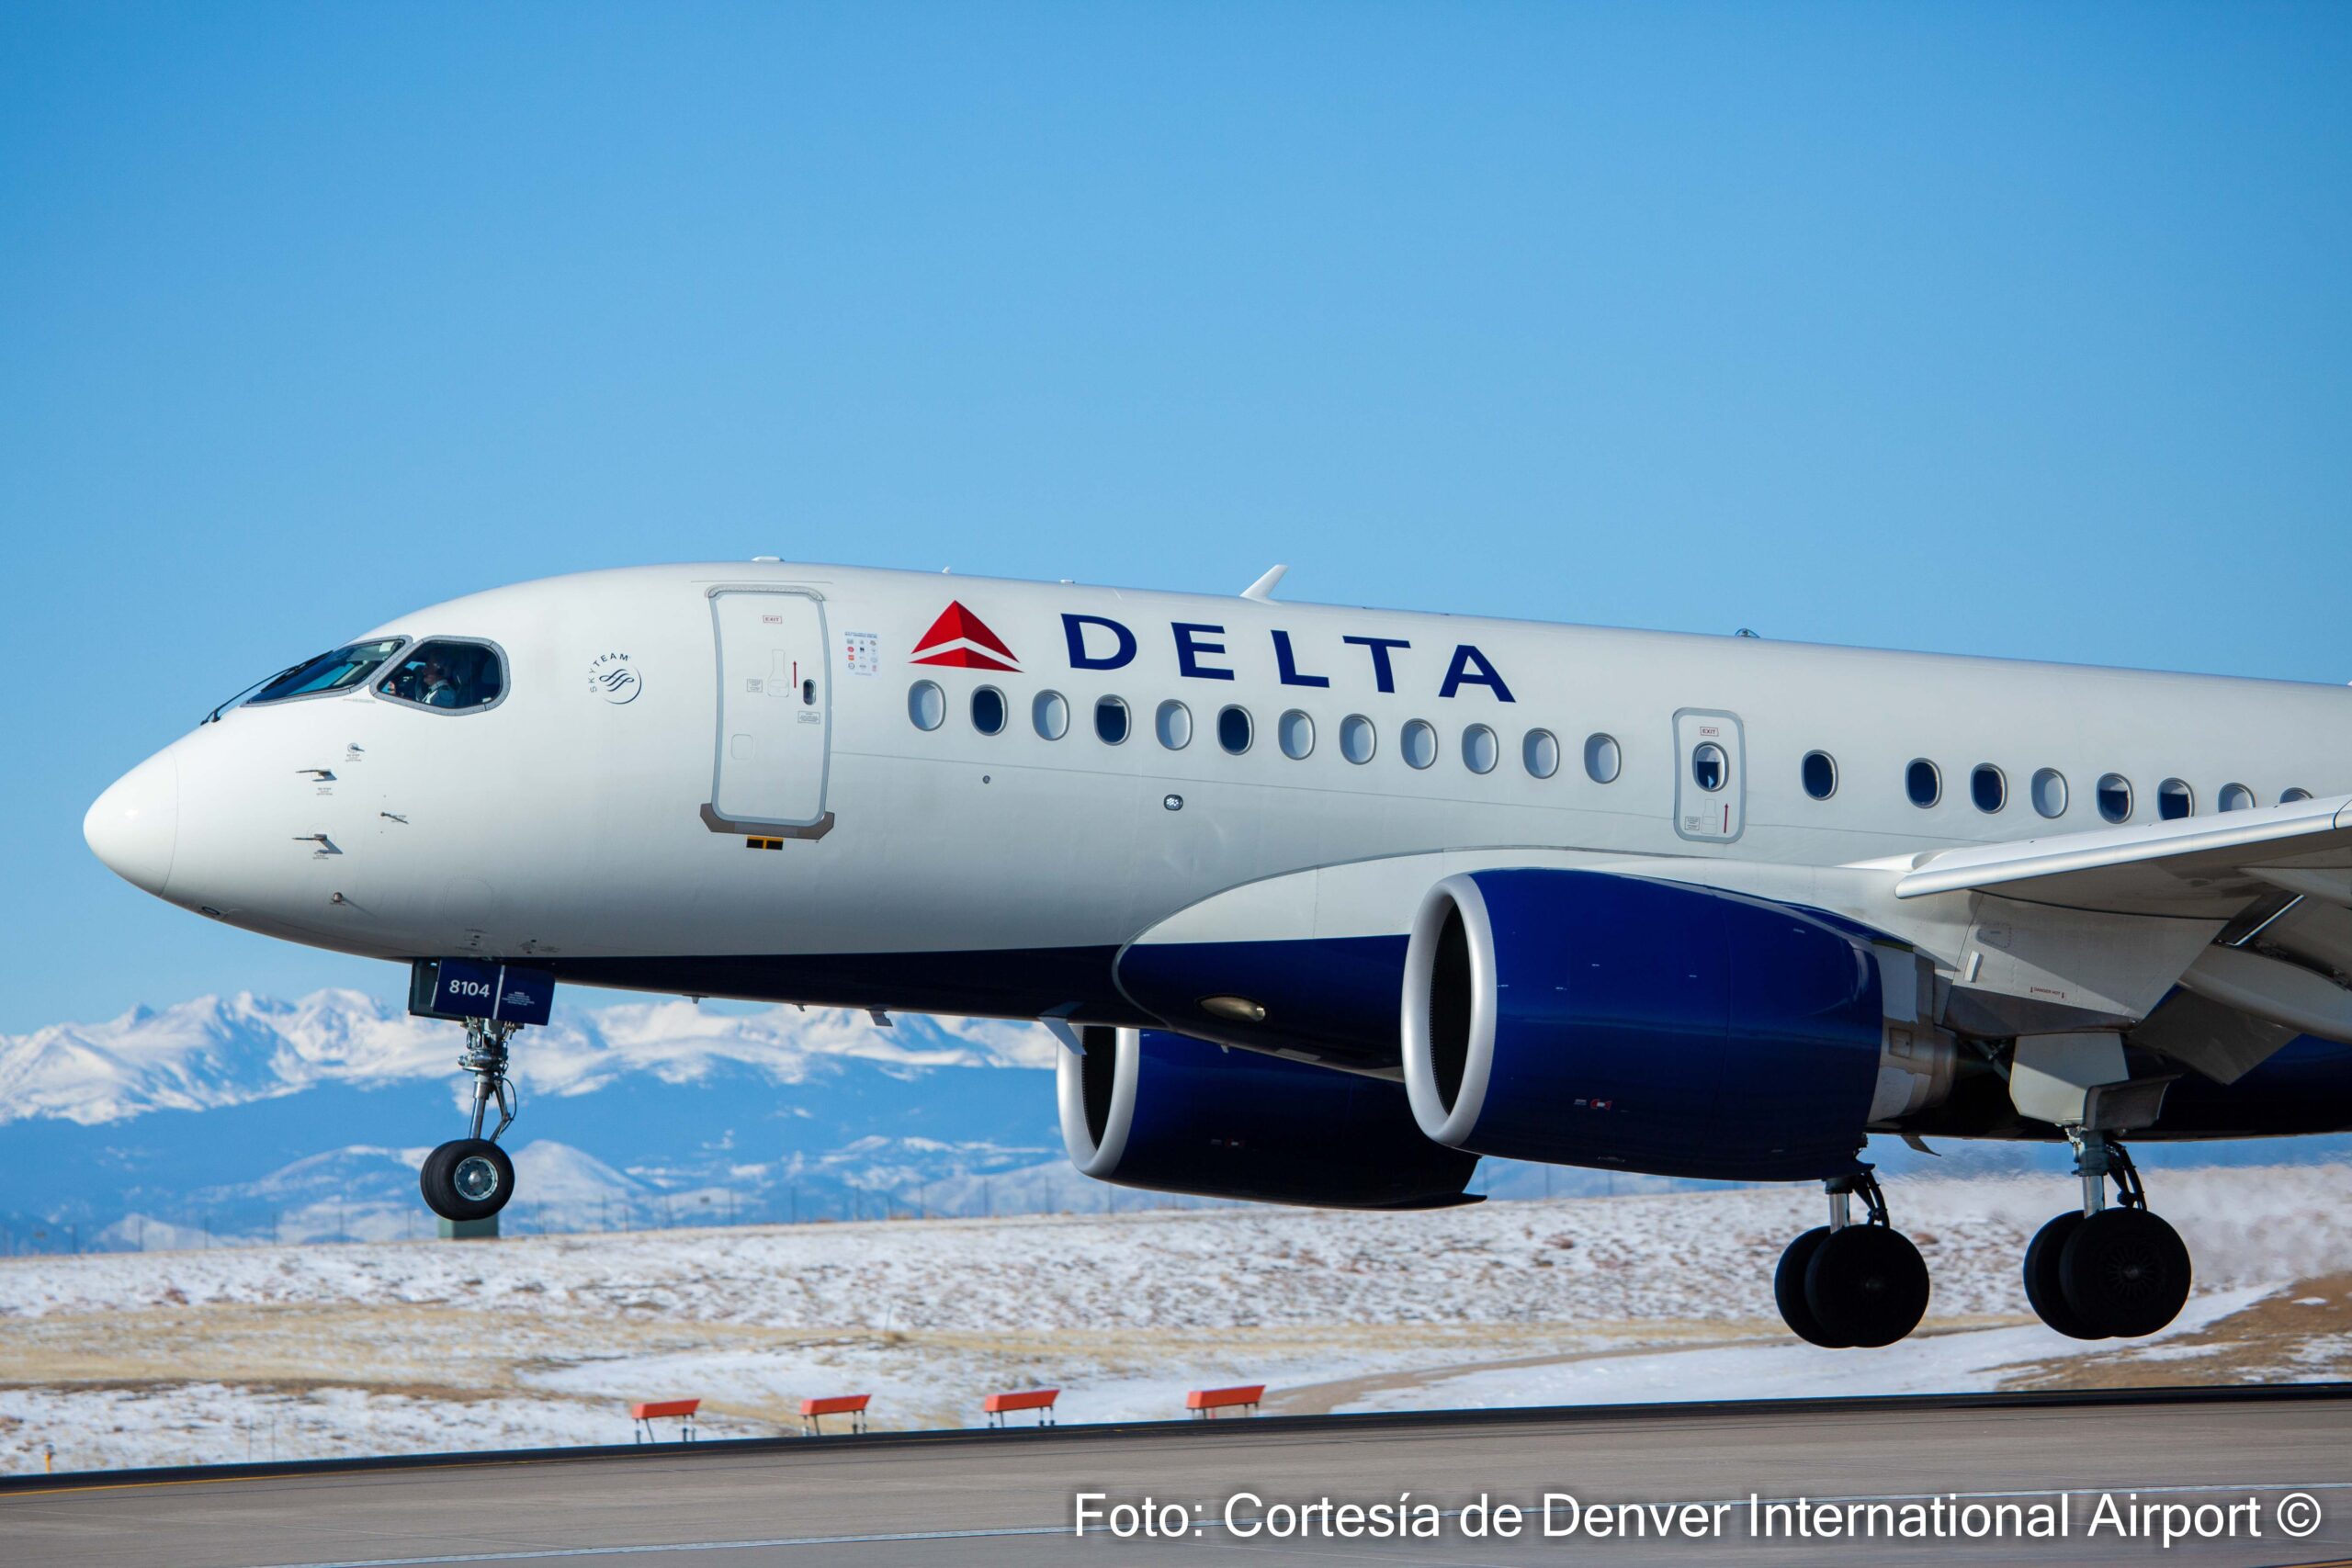 Delta obtained its first quarterly earnings since the start of the